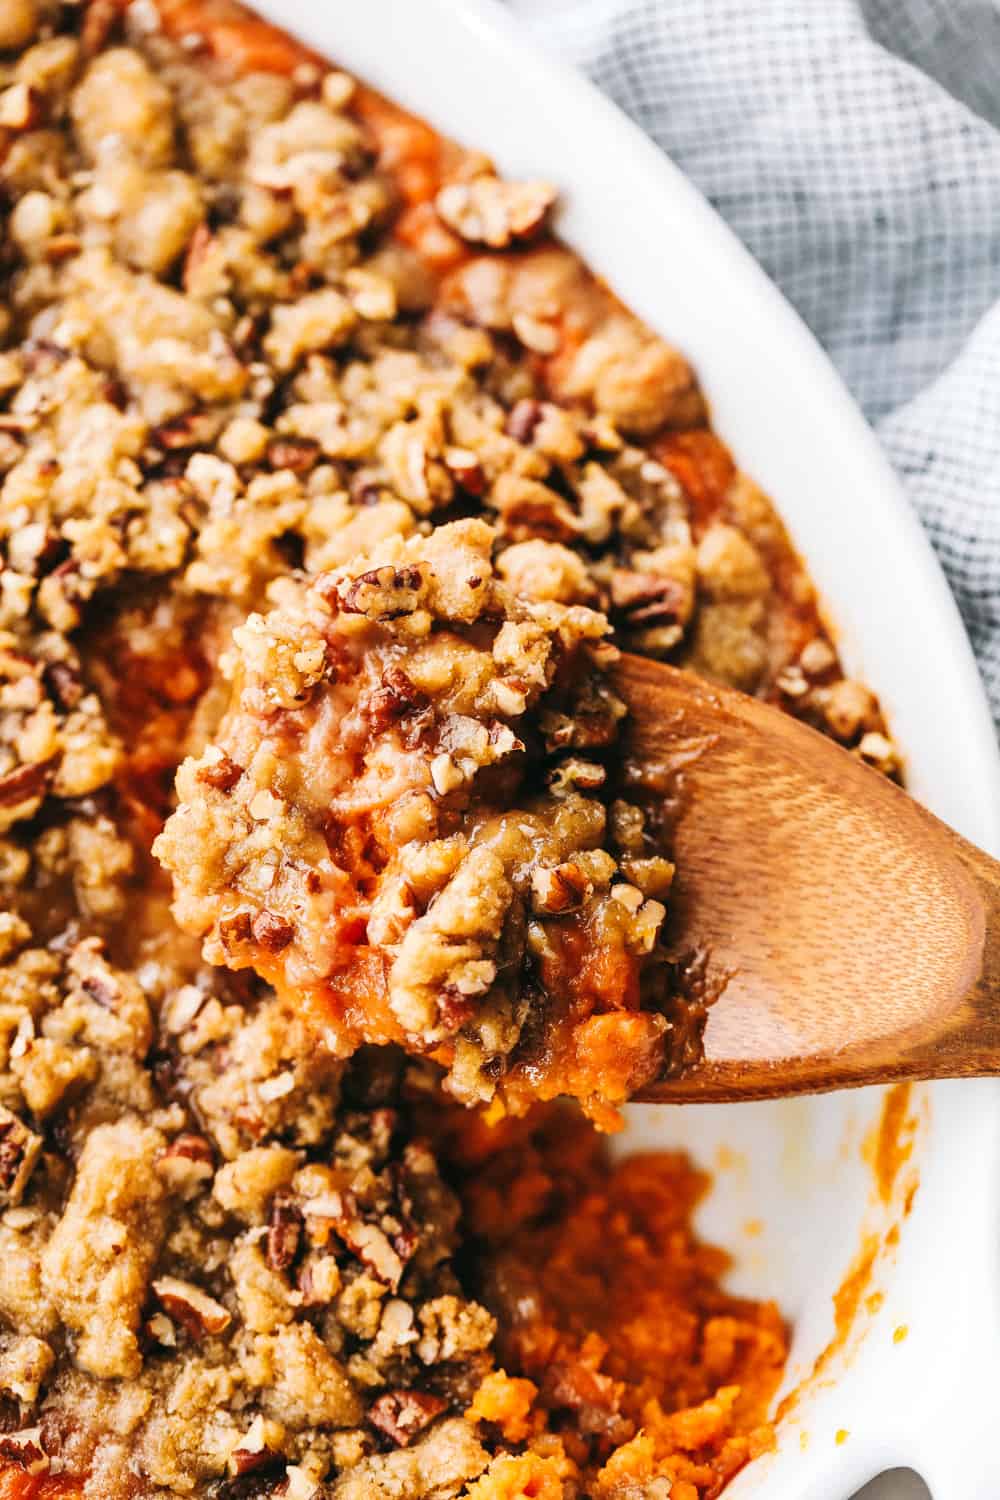 Taking a scoop of sweet potato casserole with a wooden spoon.